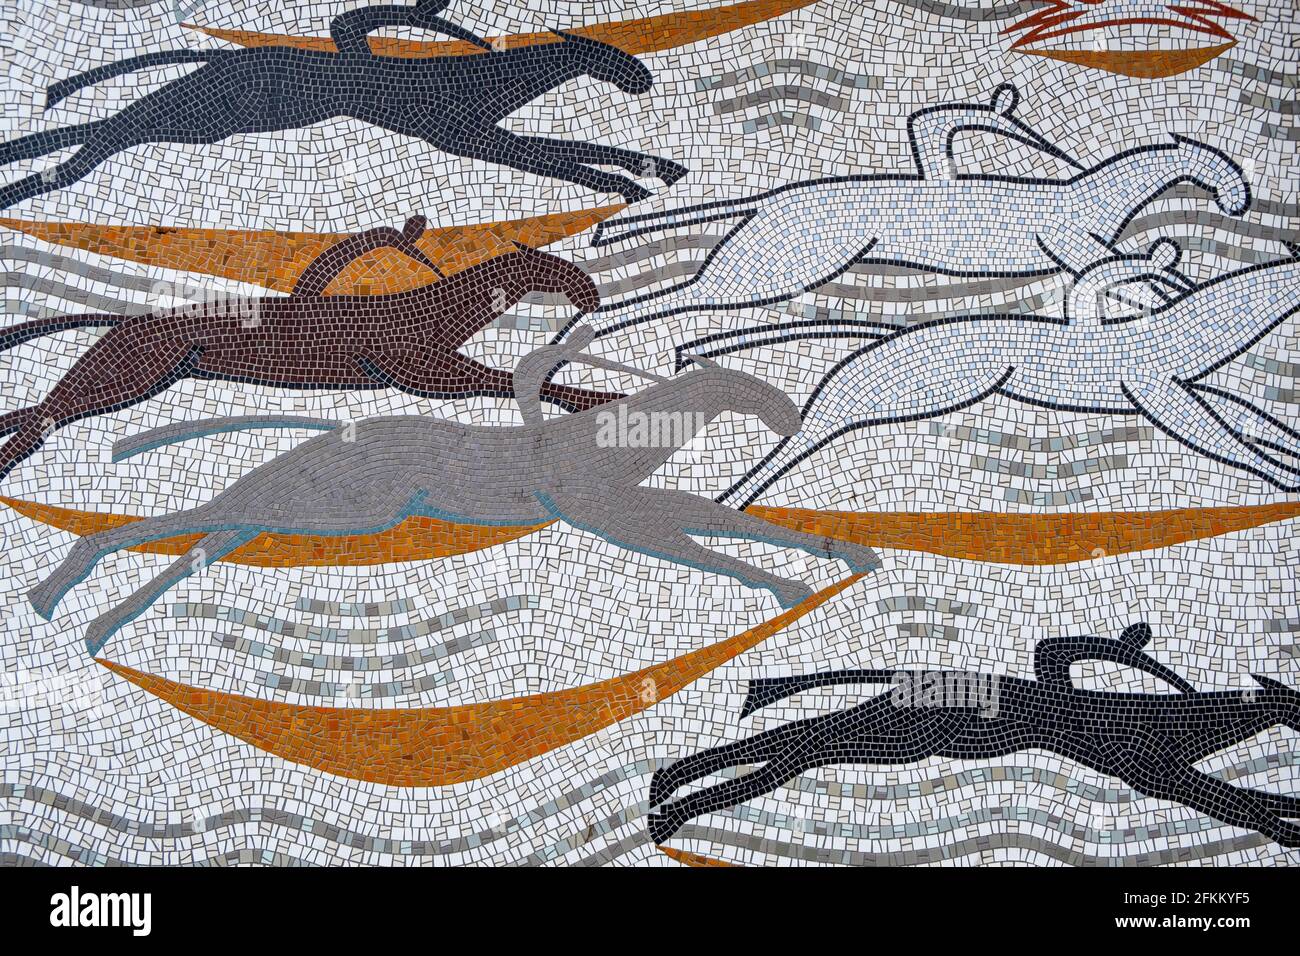 Epsom Surrey London UK, May 02 2021, Mozaic Tile Abstract Of The Famous Epsom Derby Horse Race Stock Photo